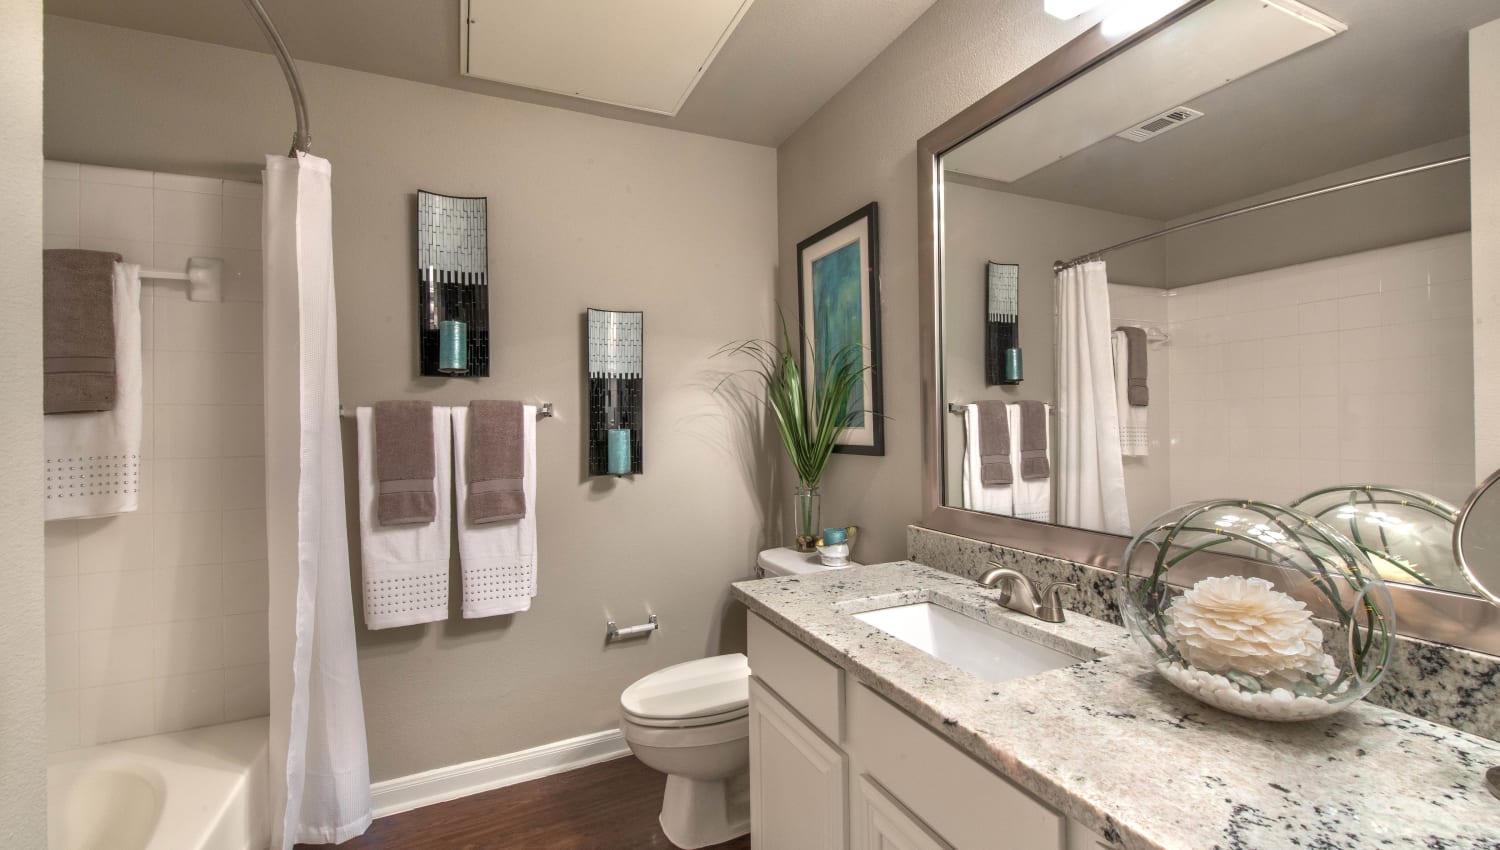 Master bathroom with a tiled shower and hardwood flooring in a model home at Olympus Las Colinas in Irving, Texas